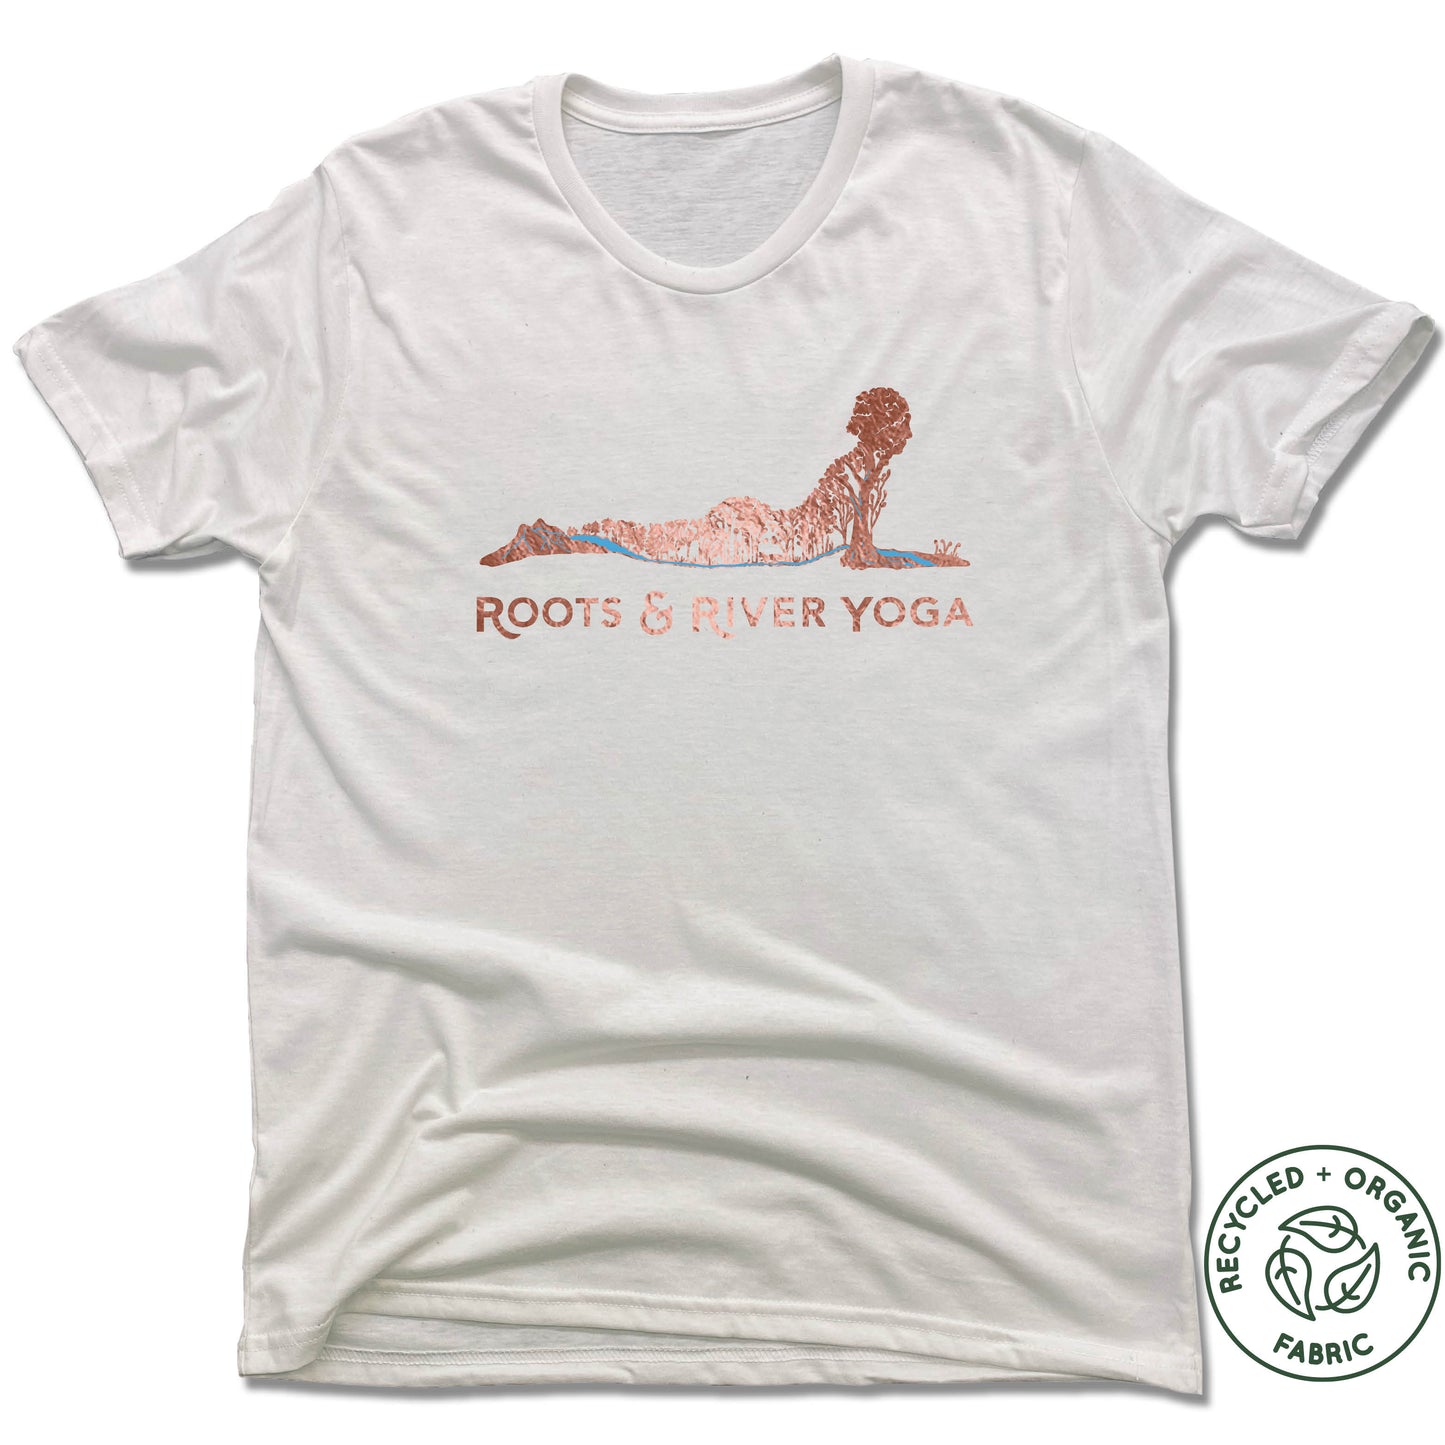 ROOTS & RIVER YOGA | UNISEX WHITE Recycled Tri-Blend | ROSE GOLD LOGO